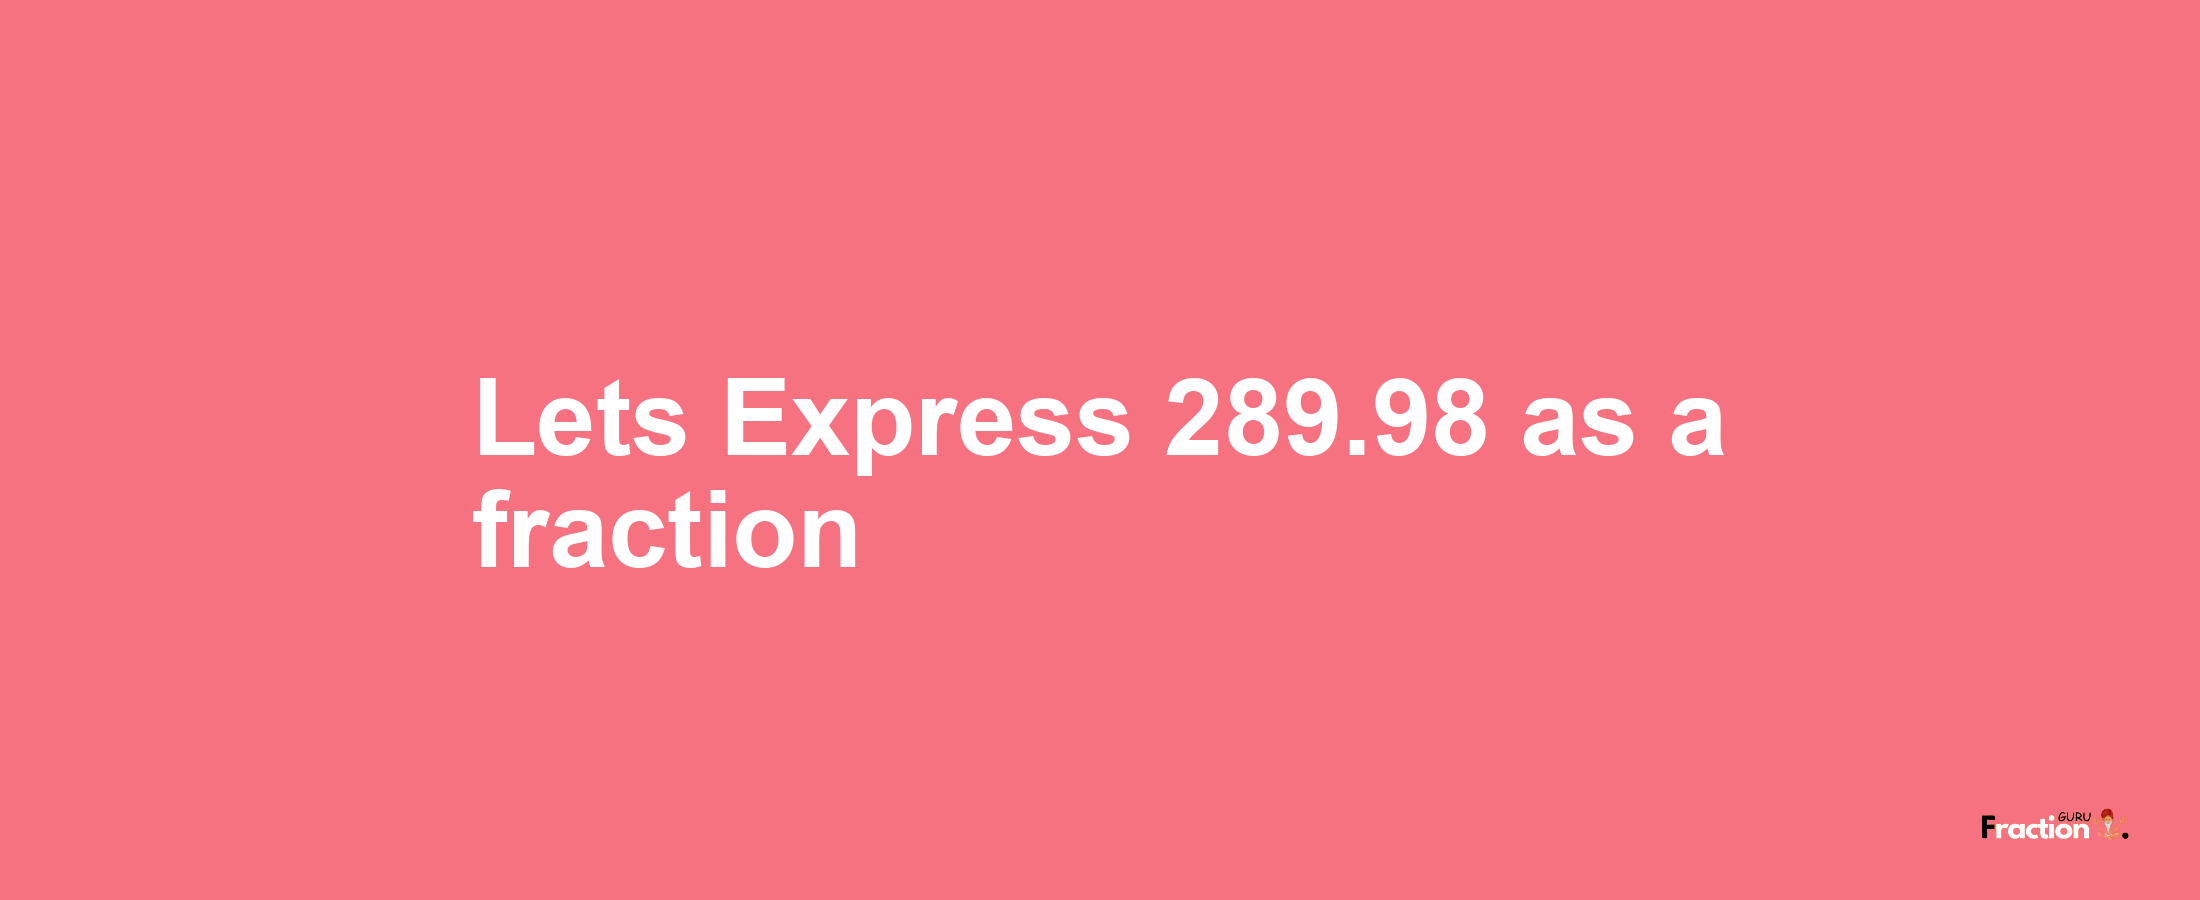 Lets Express 289.98 as afraction